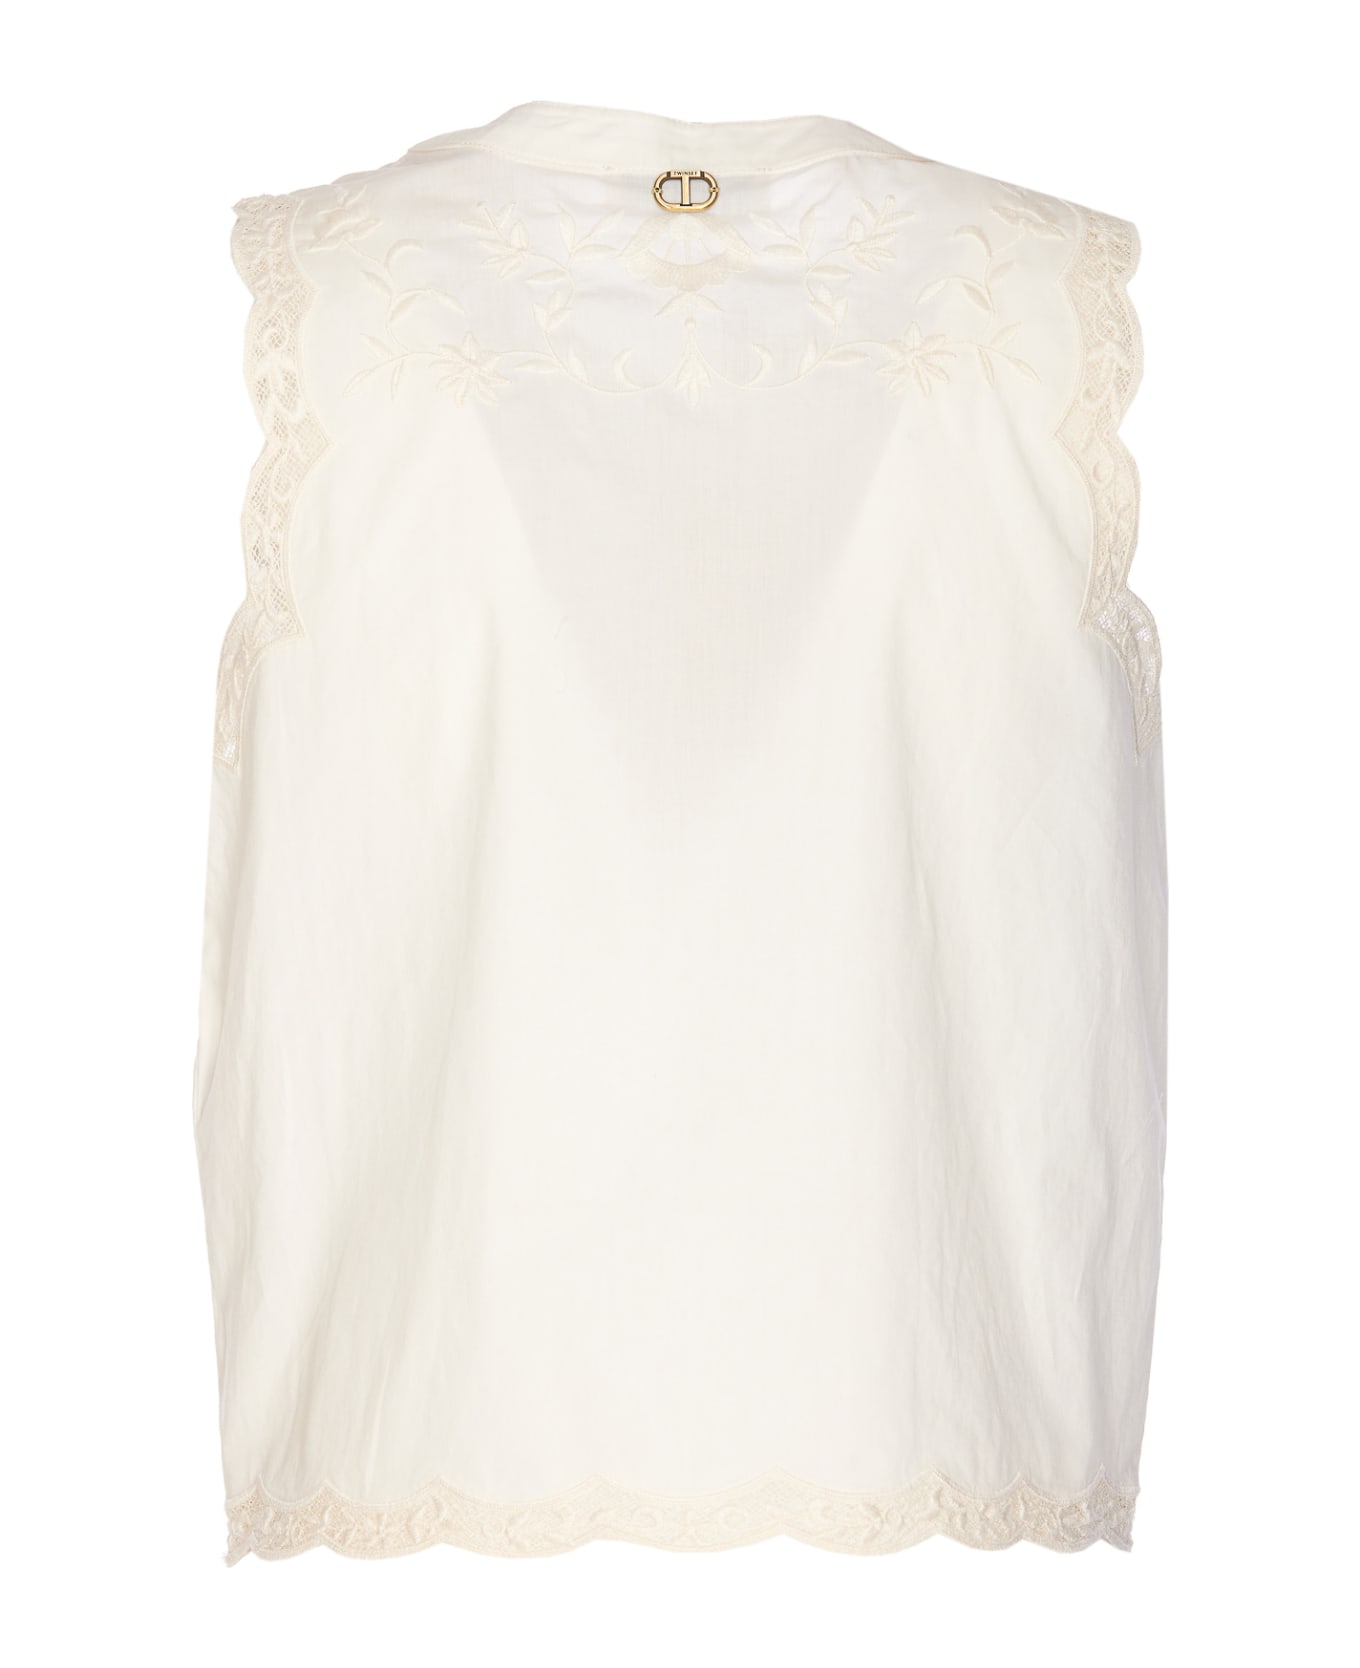 TwinSet Sleeveless Top With Flowers Embroidery - White トップス